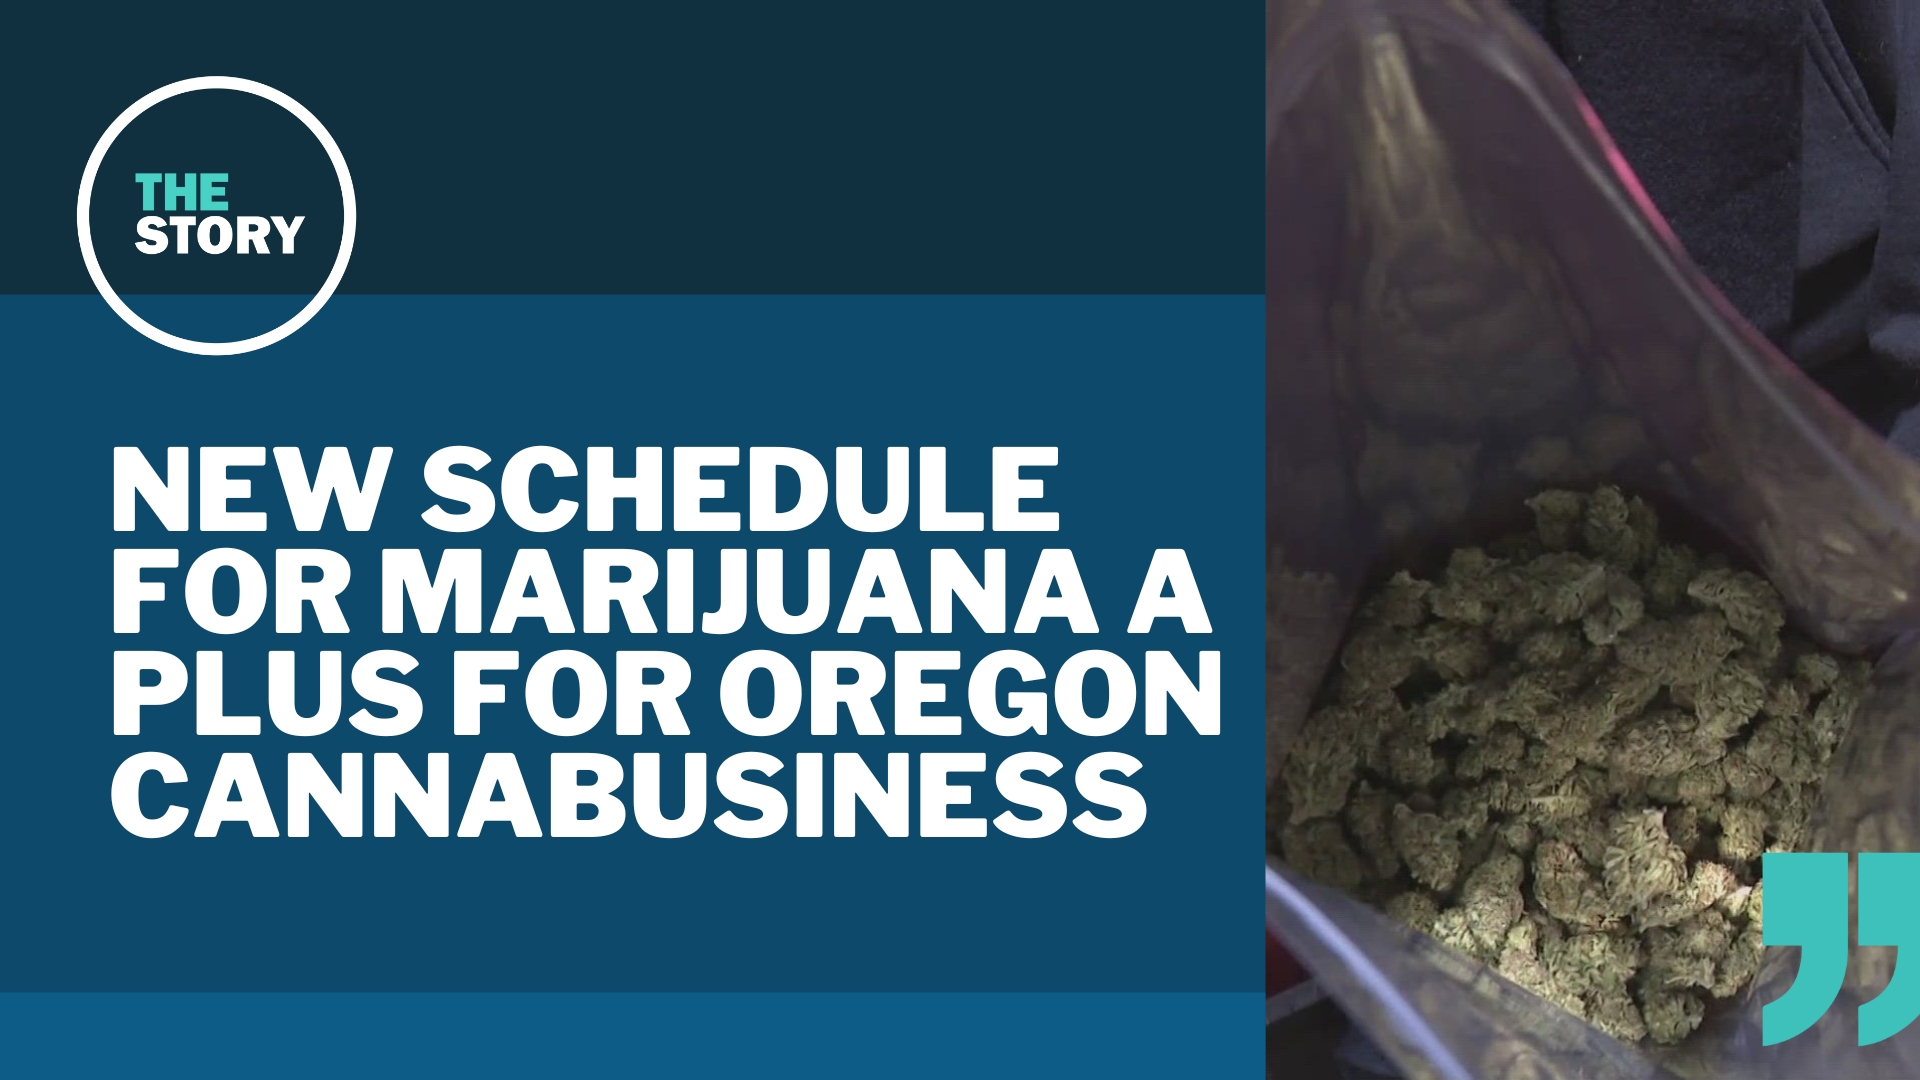 Banking would still be difficult for the Oregon cannabis industry, but DEA reclassification could lower costs for those businesses via tax cuts.